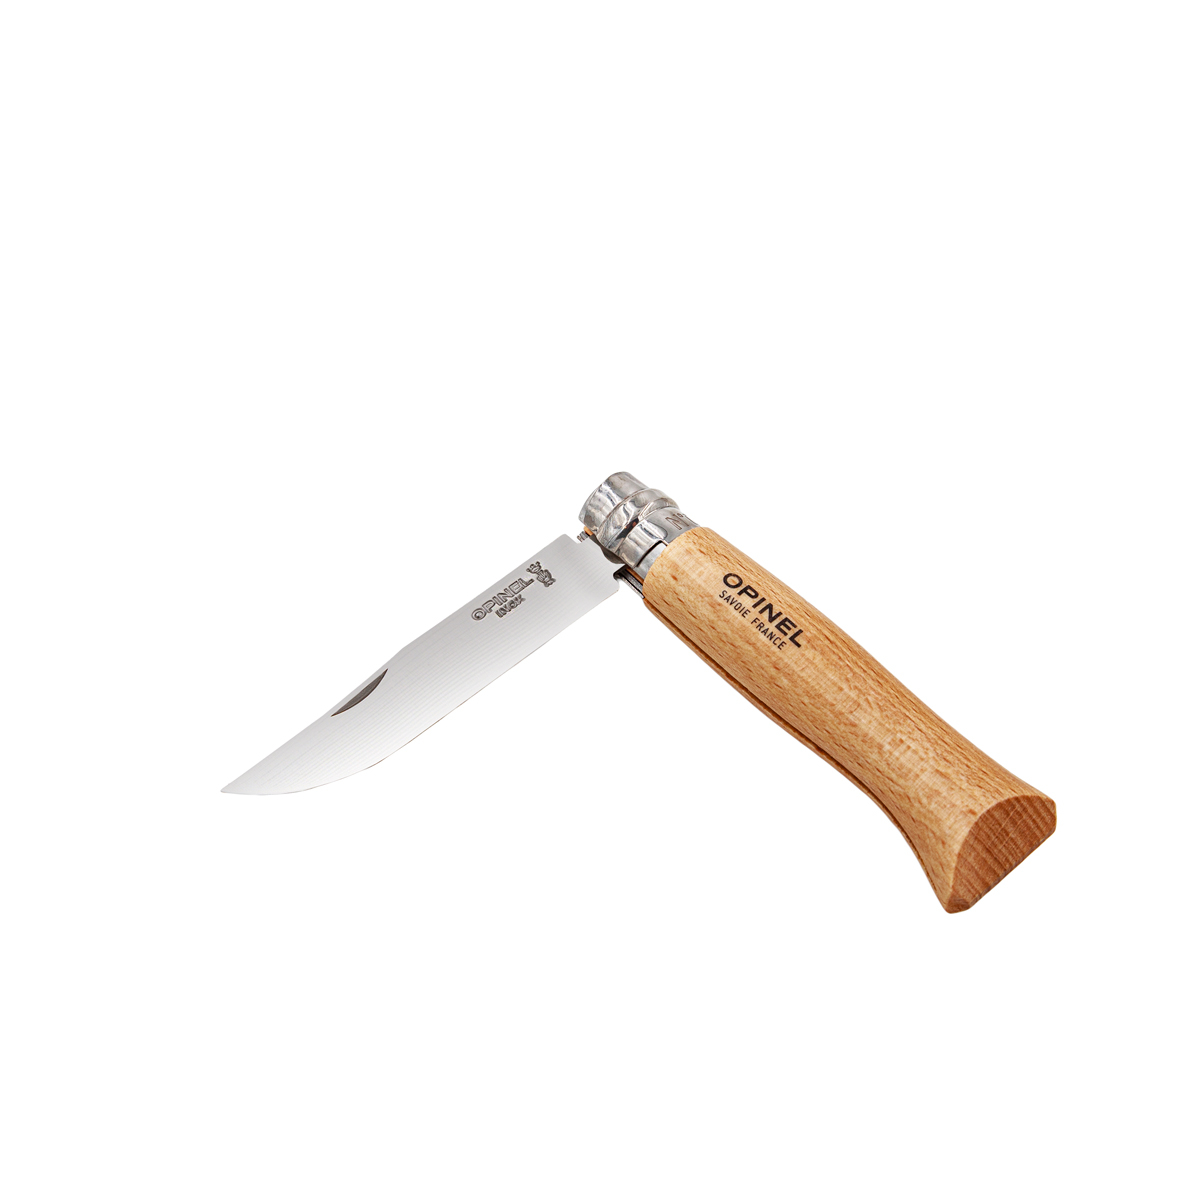  Opinel No.08 Stainless Steel Folding Knife with Oak